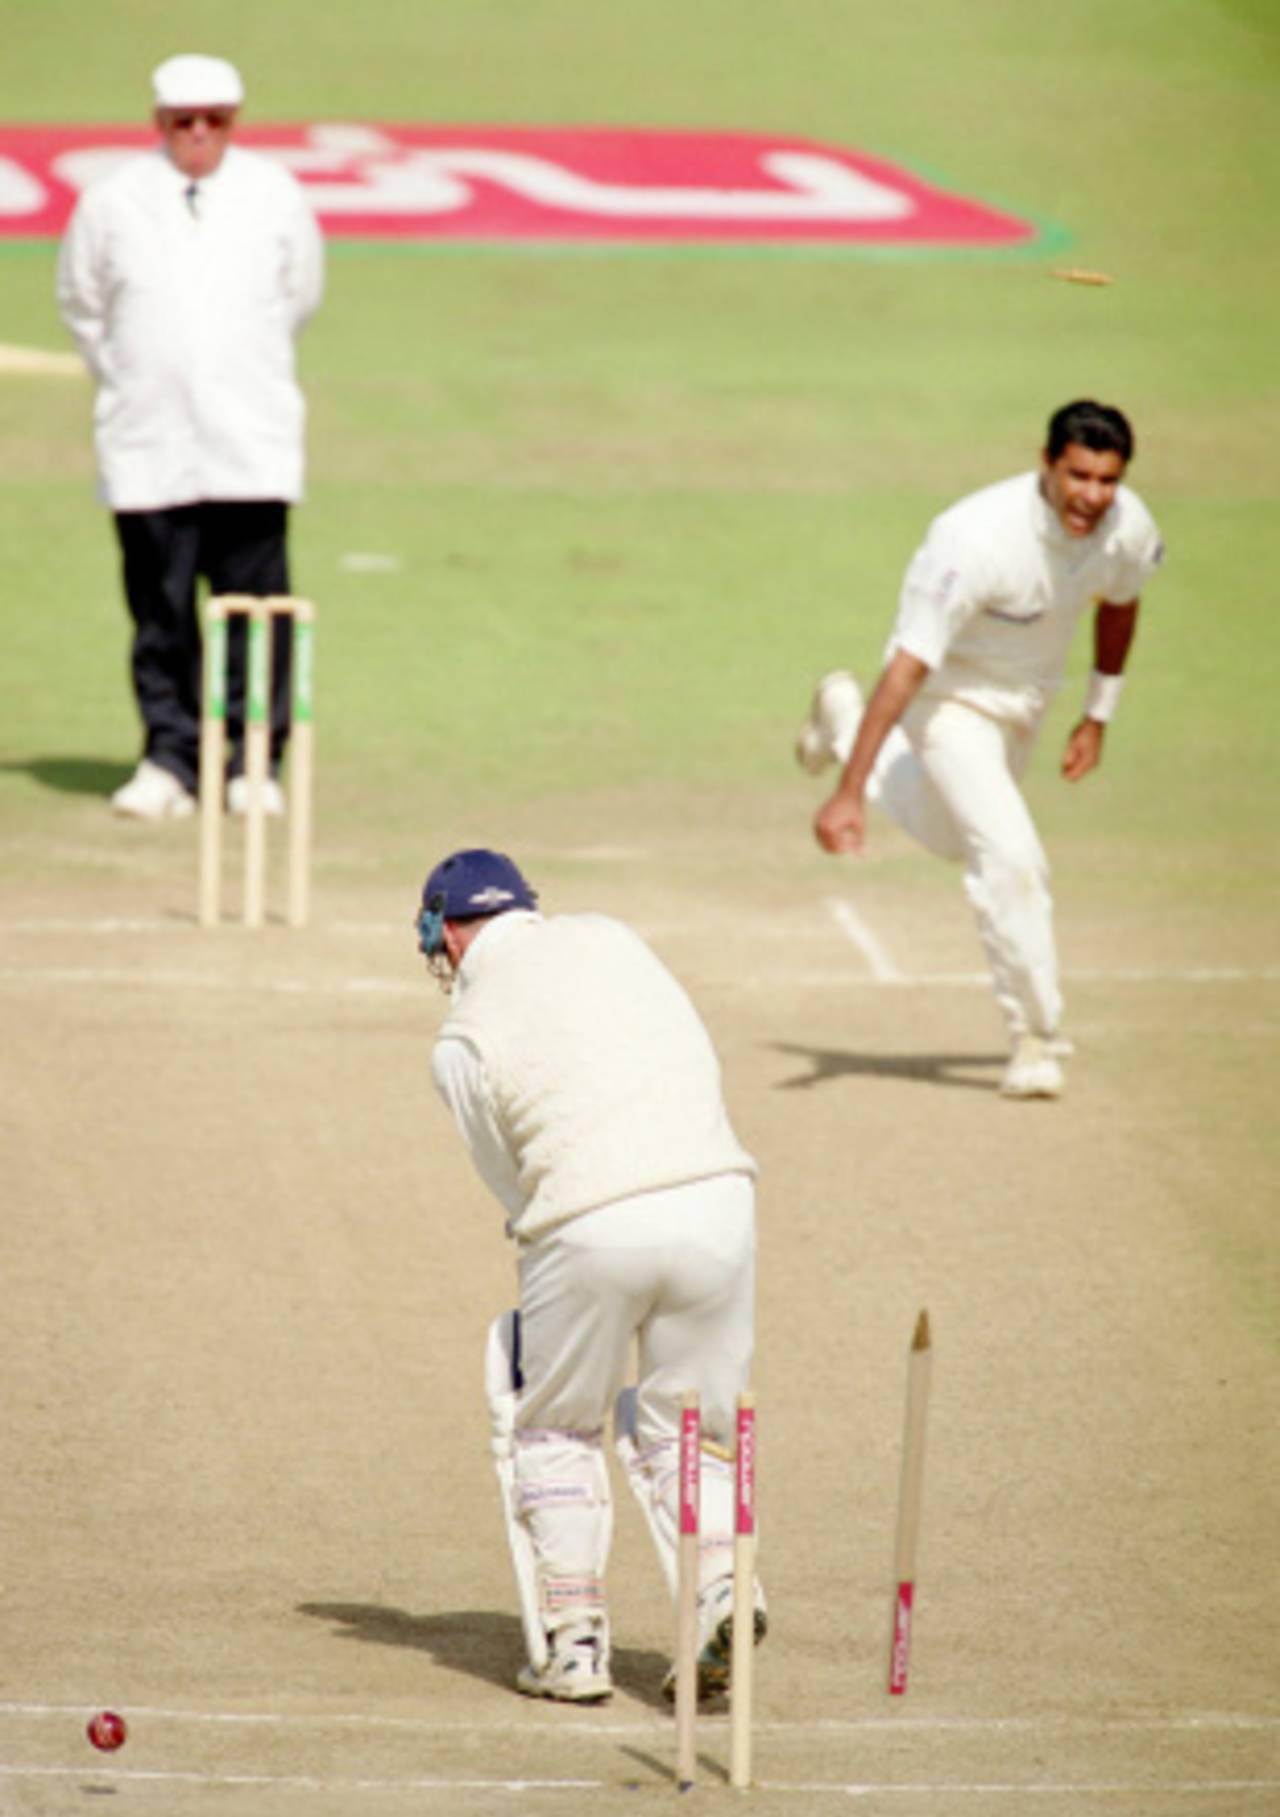 Graham Thorpe is bowled by Waqar Younis for 10, England v Pakistan, 2nd Test, Old Trafford, 5th day, June 4, 2001